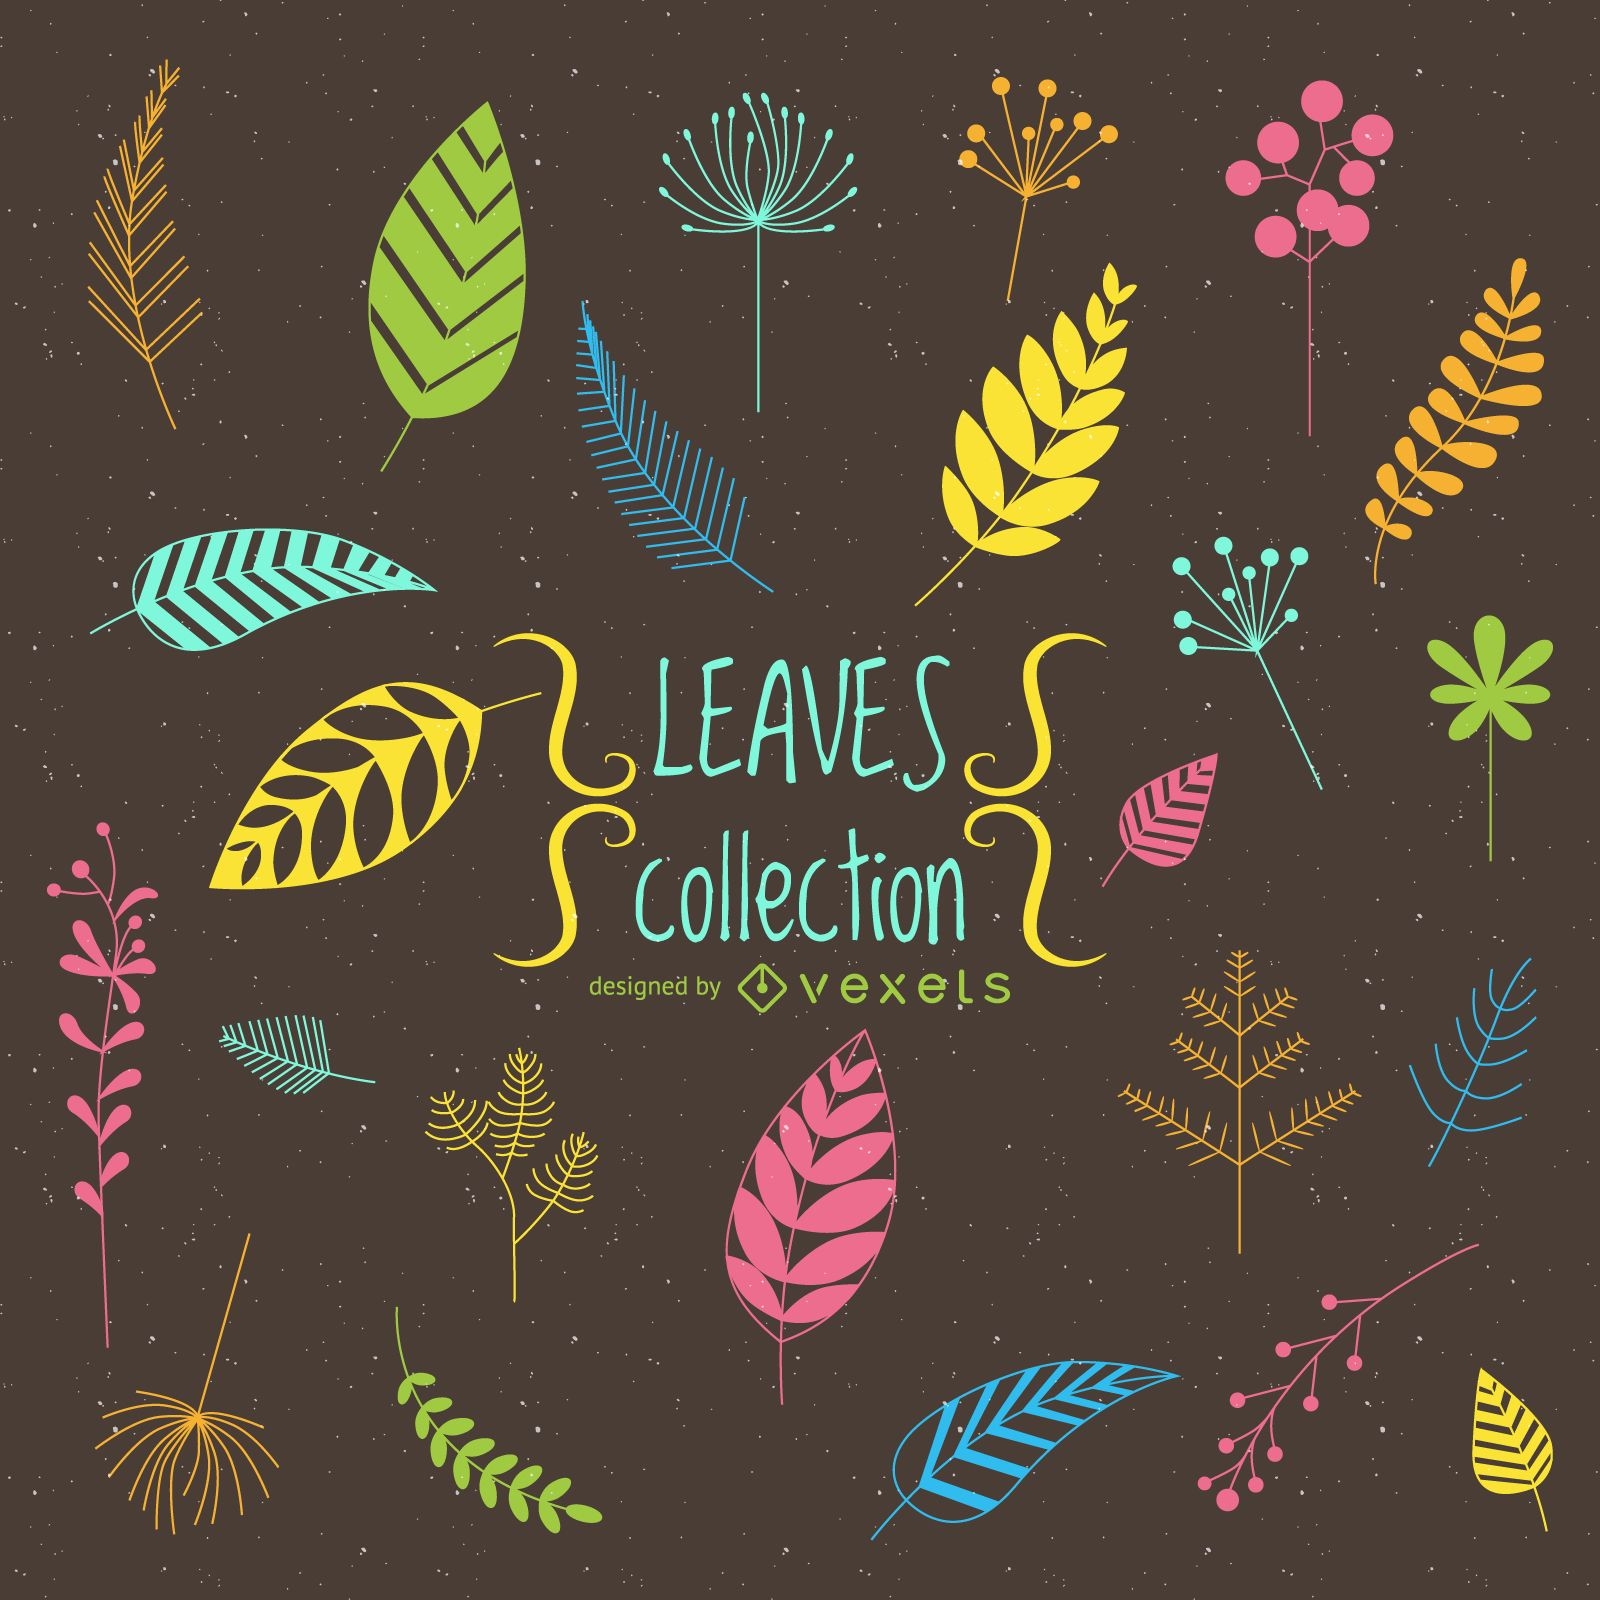 Drawn leaves collection